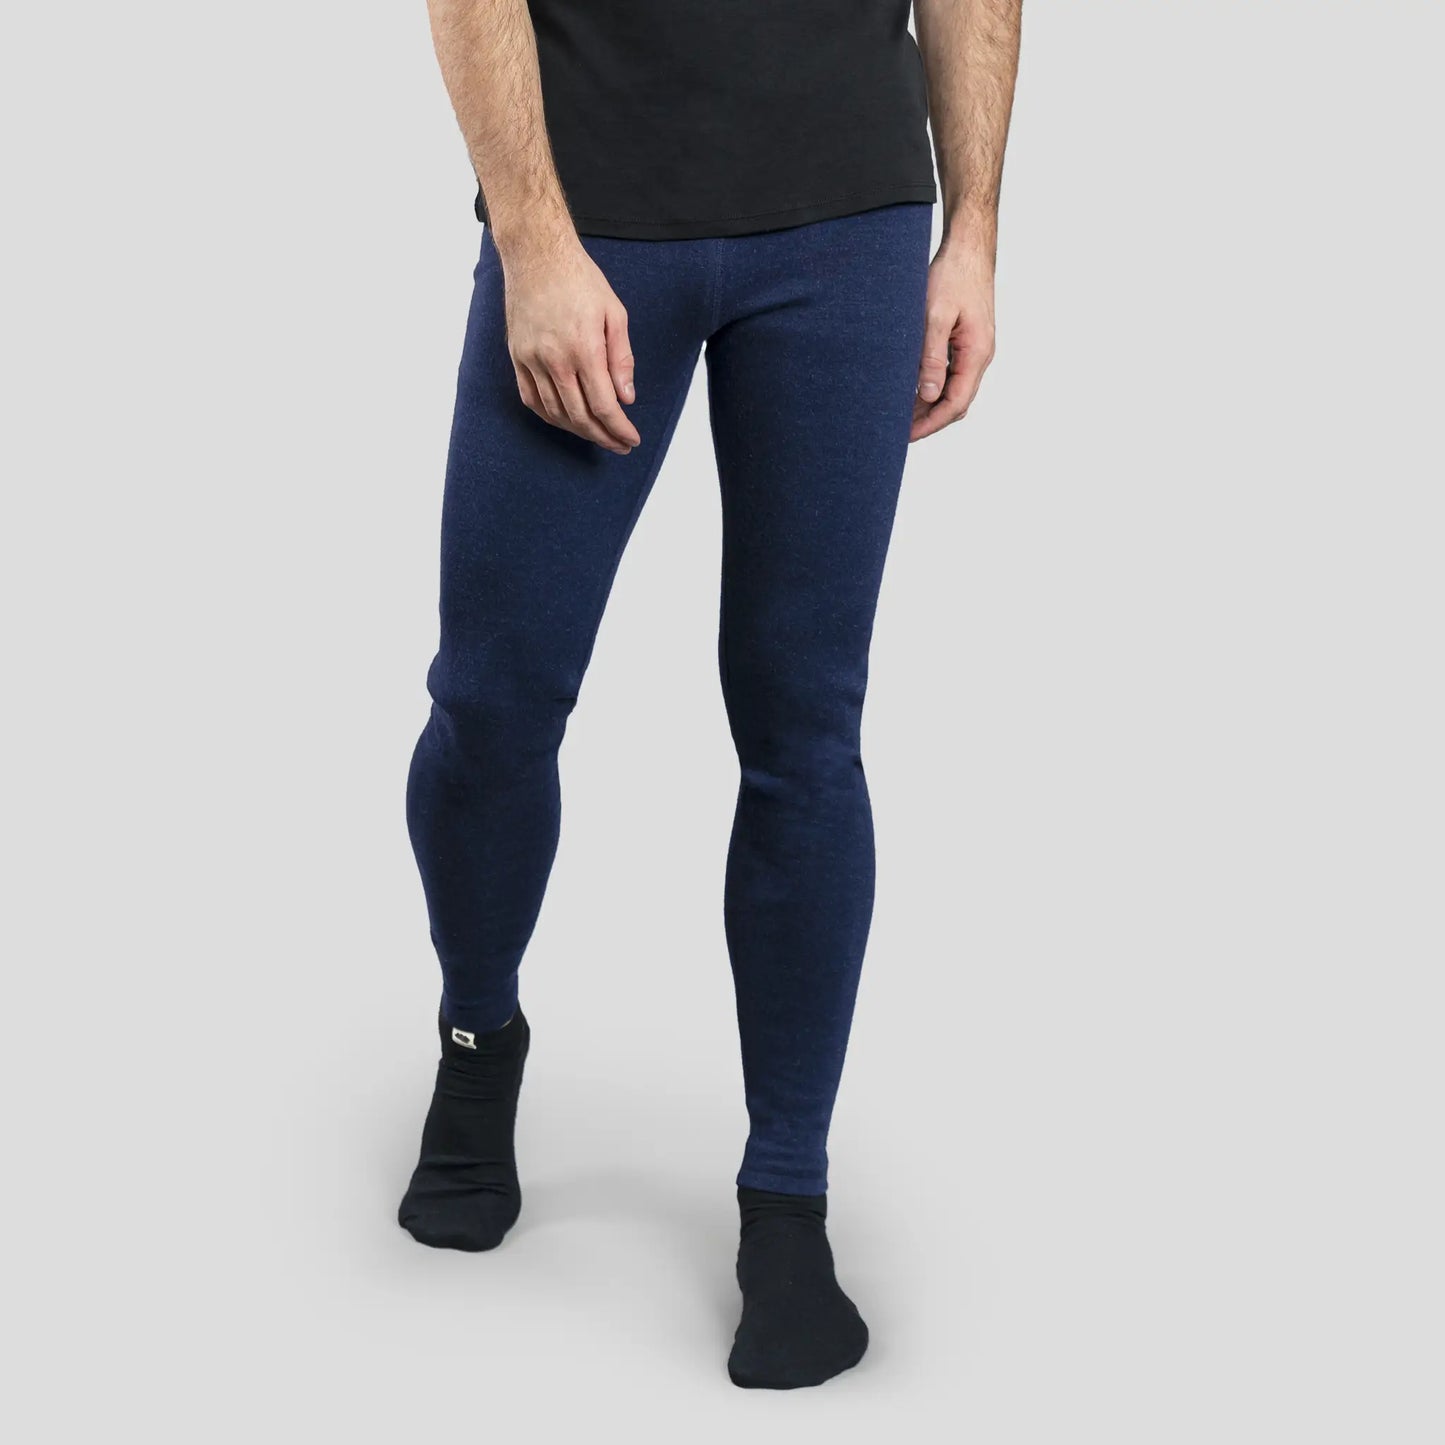 mens outdoor leggings midweight color navy blue